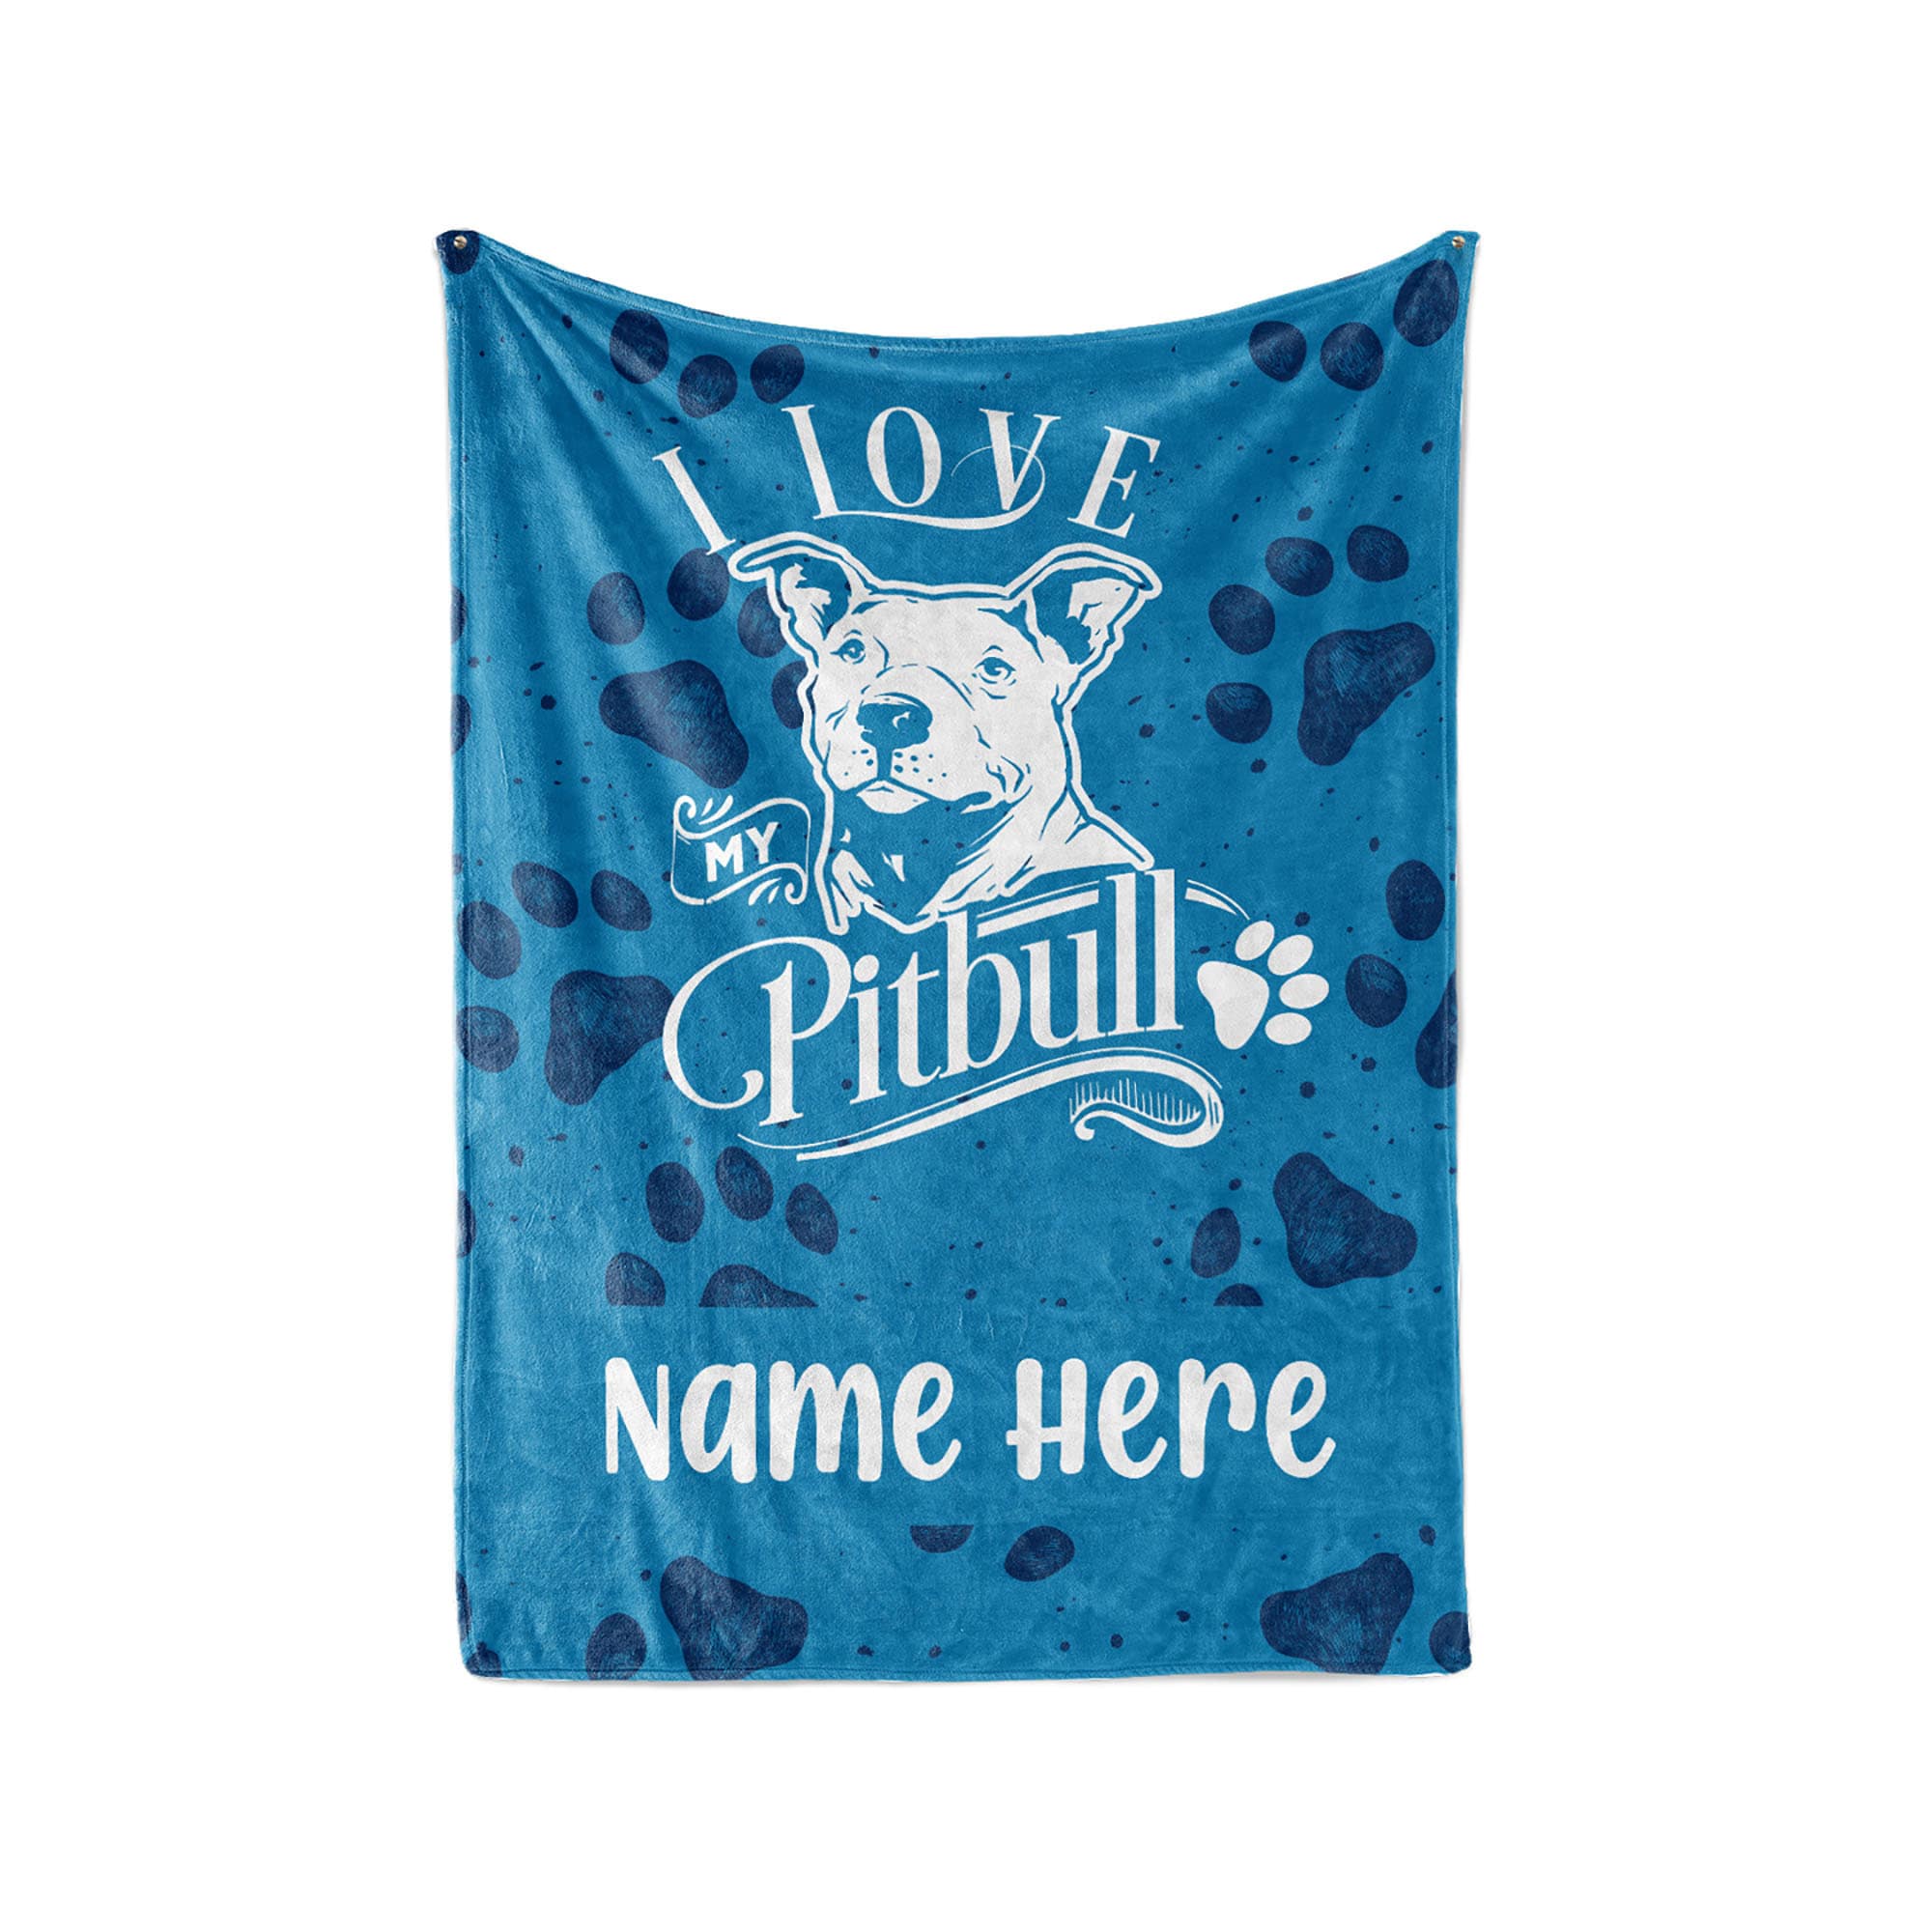 FannyMT Pitbull Dog Turquoise Blanket Throw Lightweight Cozy Plush Microfiber Solid Blankets for Kids Adults 60 x 50 Inch 